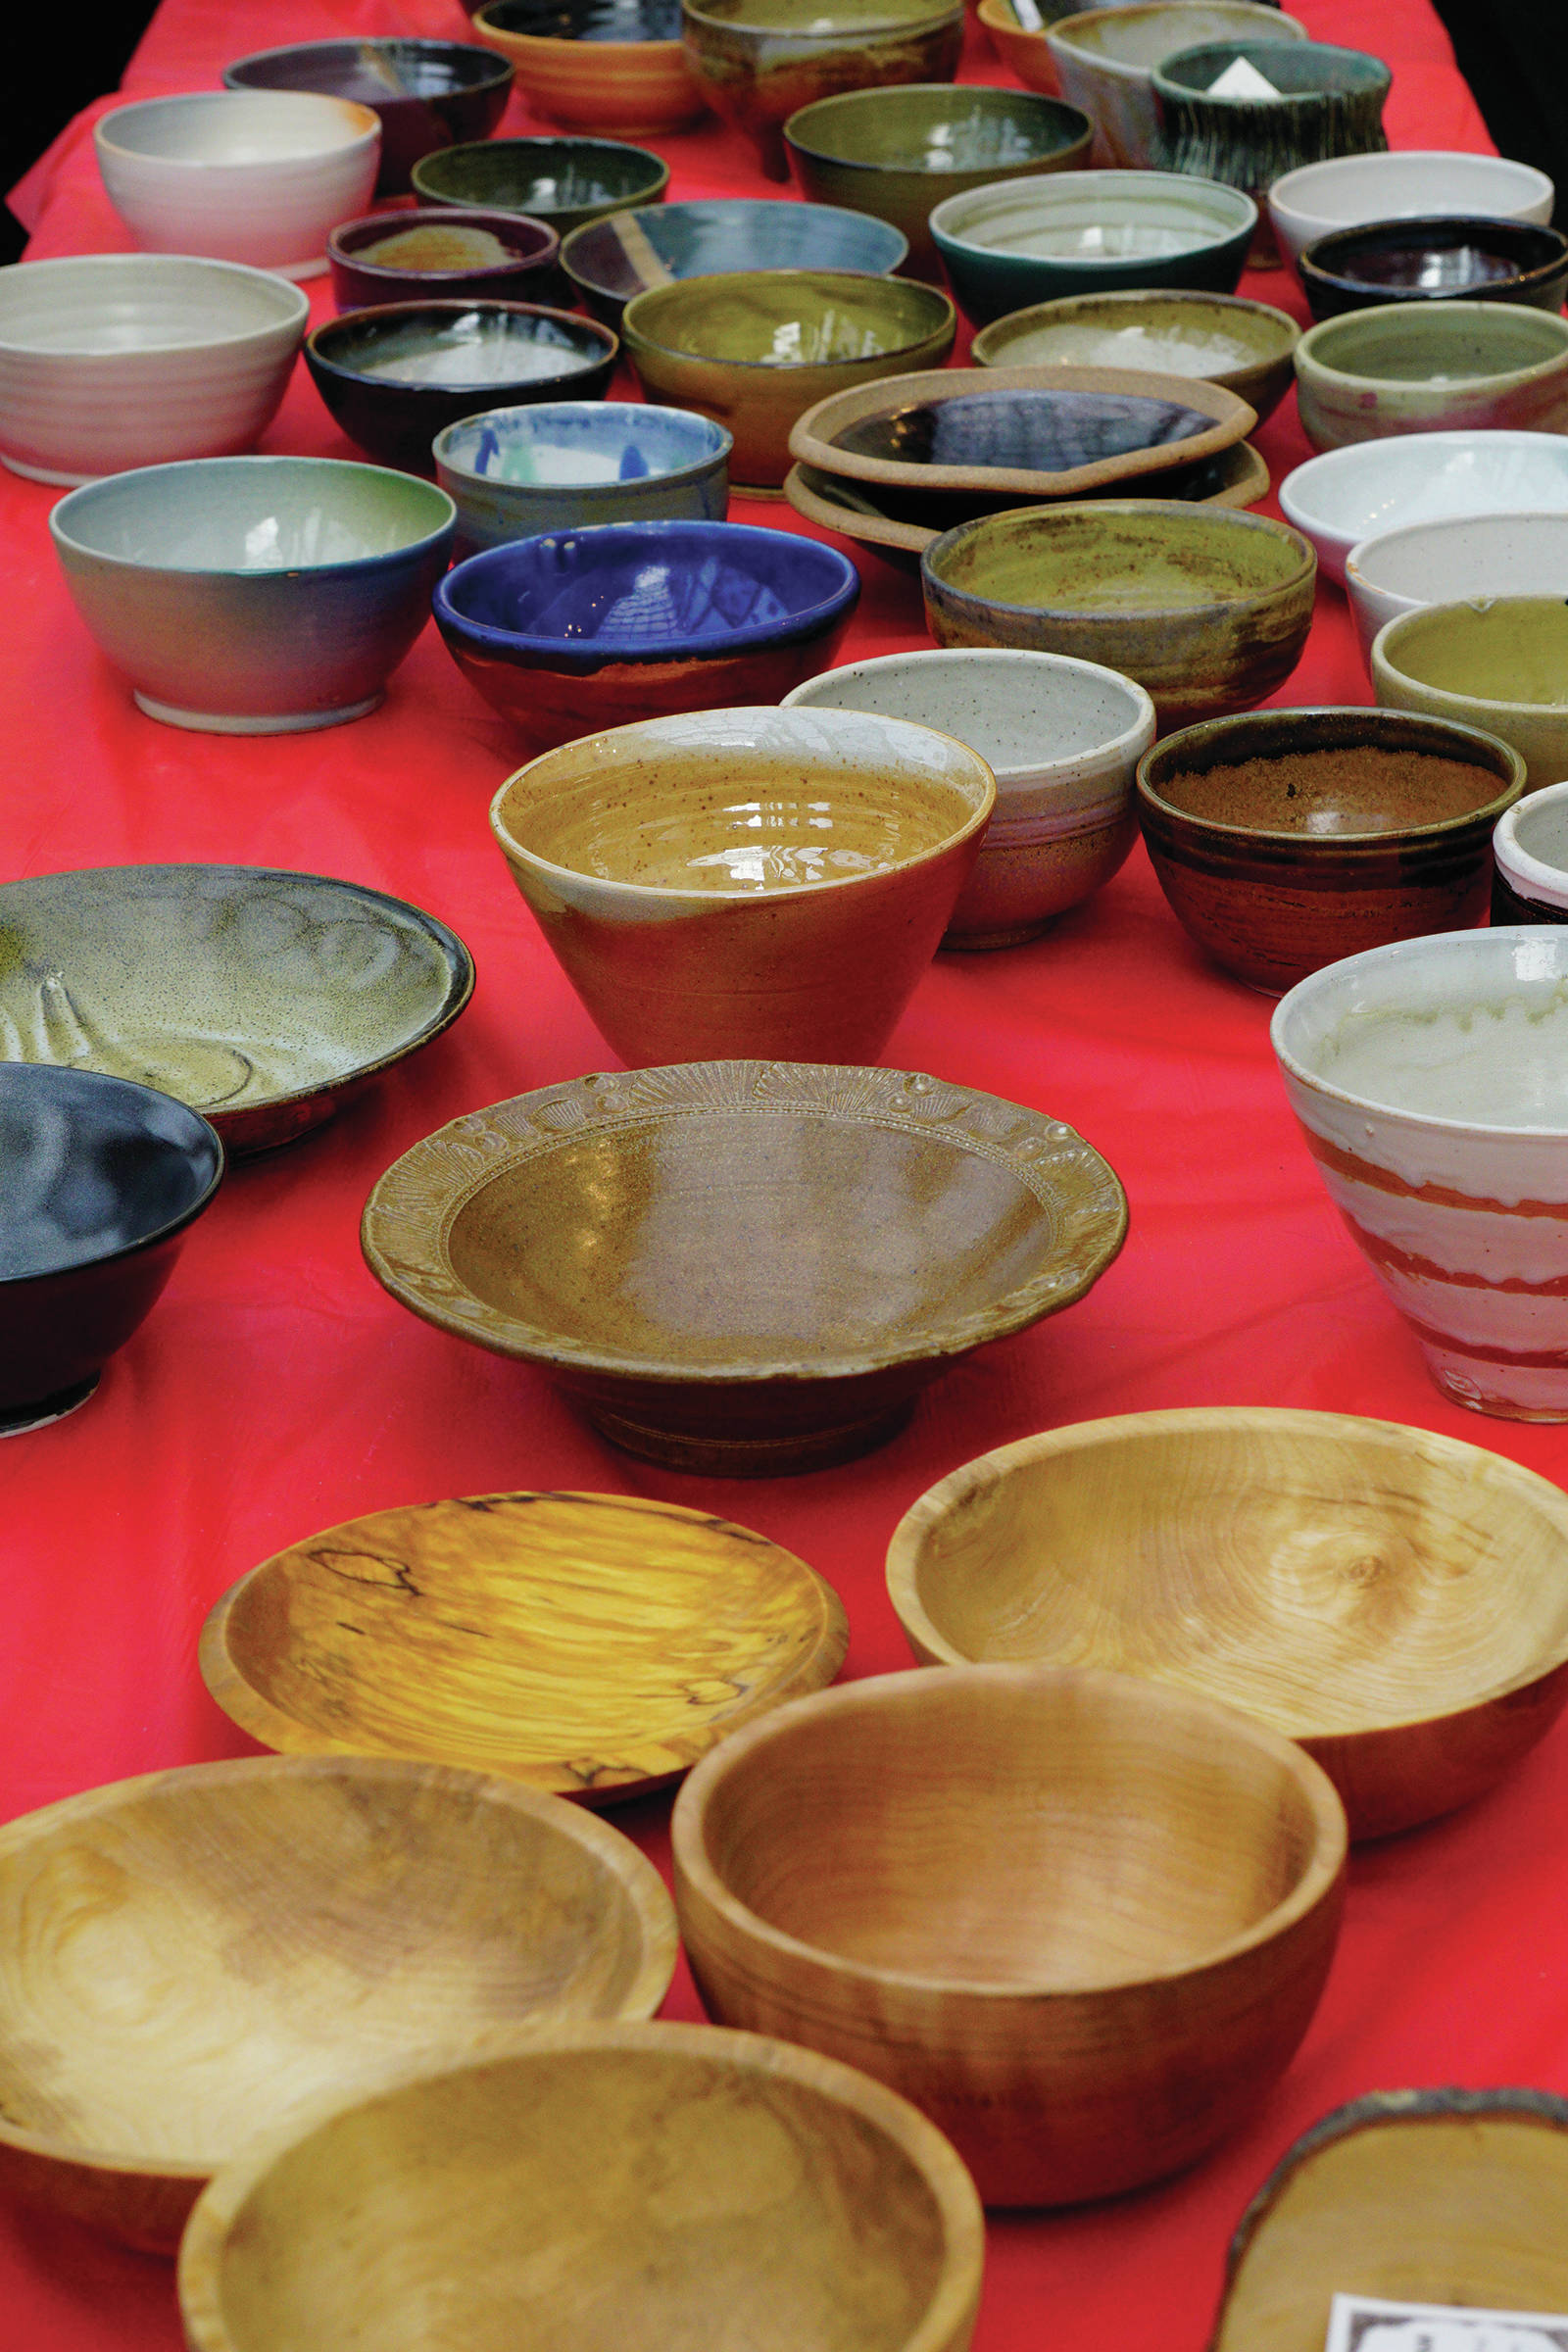 Bowls for sale are displayed at the annual Homer Community Food Pantry’s Empty Bowls fundraiser on Friday, Nov. 8, 2019, at Homer United Methodist Church in Homer, Alaska. People could purchase just soup or, for $35, buy a handcrafted ceramic or wooden bowl with their soup. (Photo by Michael Armstrong/Homer News)